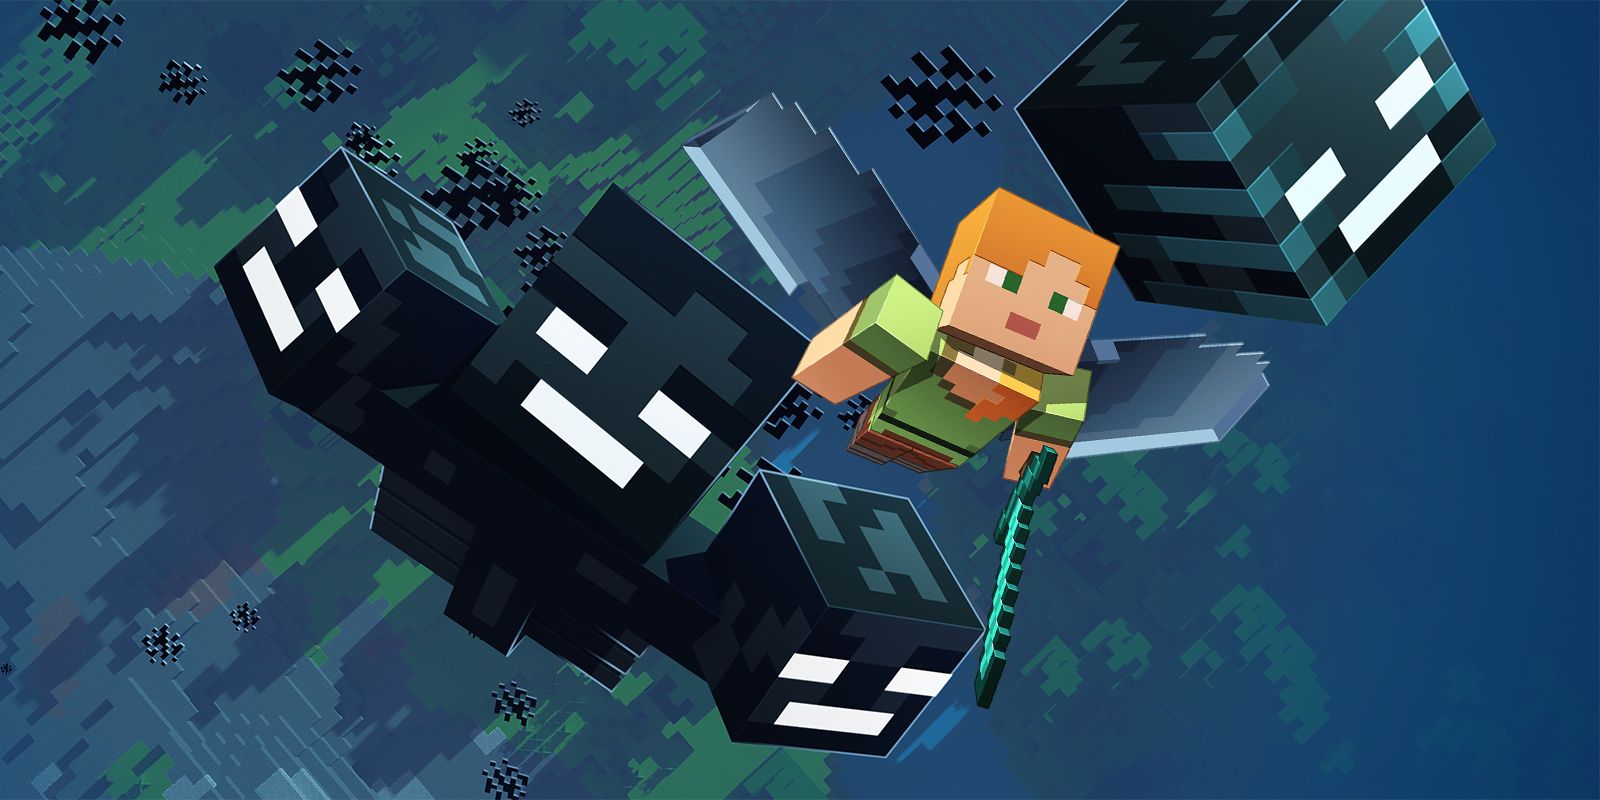 Minecraft Wither Boss Battle Over The Ocean Evolves Into Dogfight